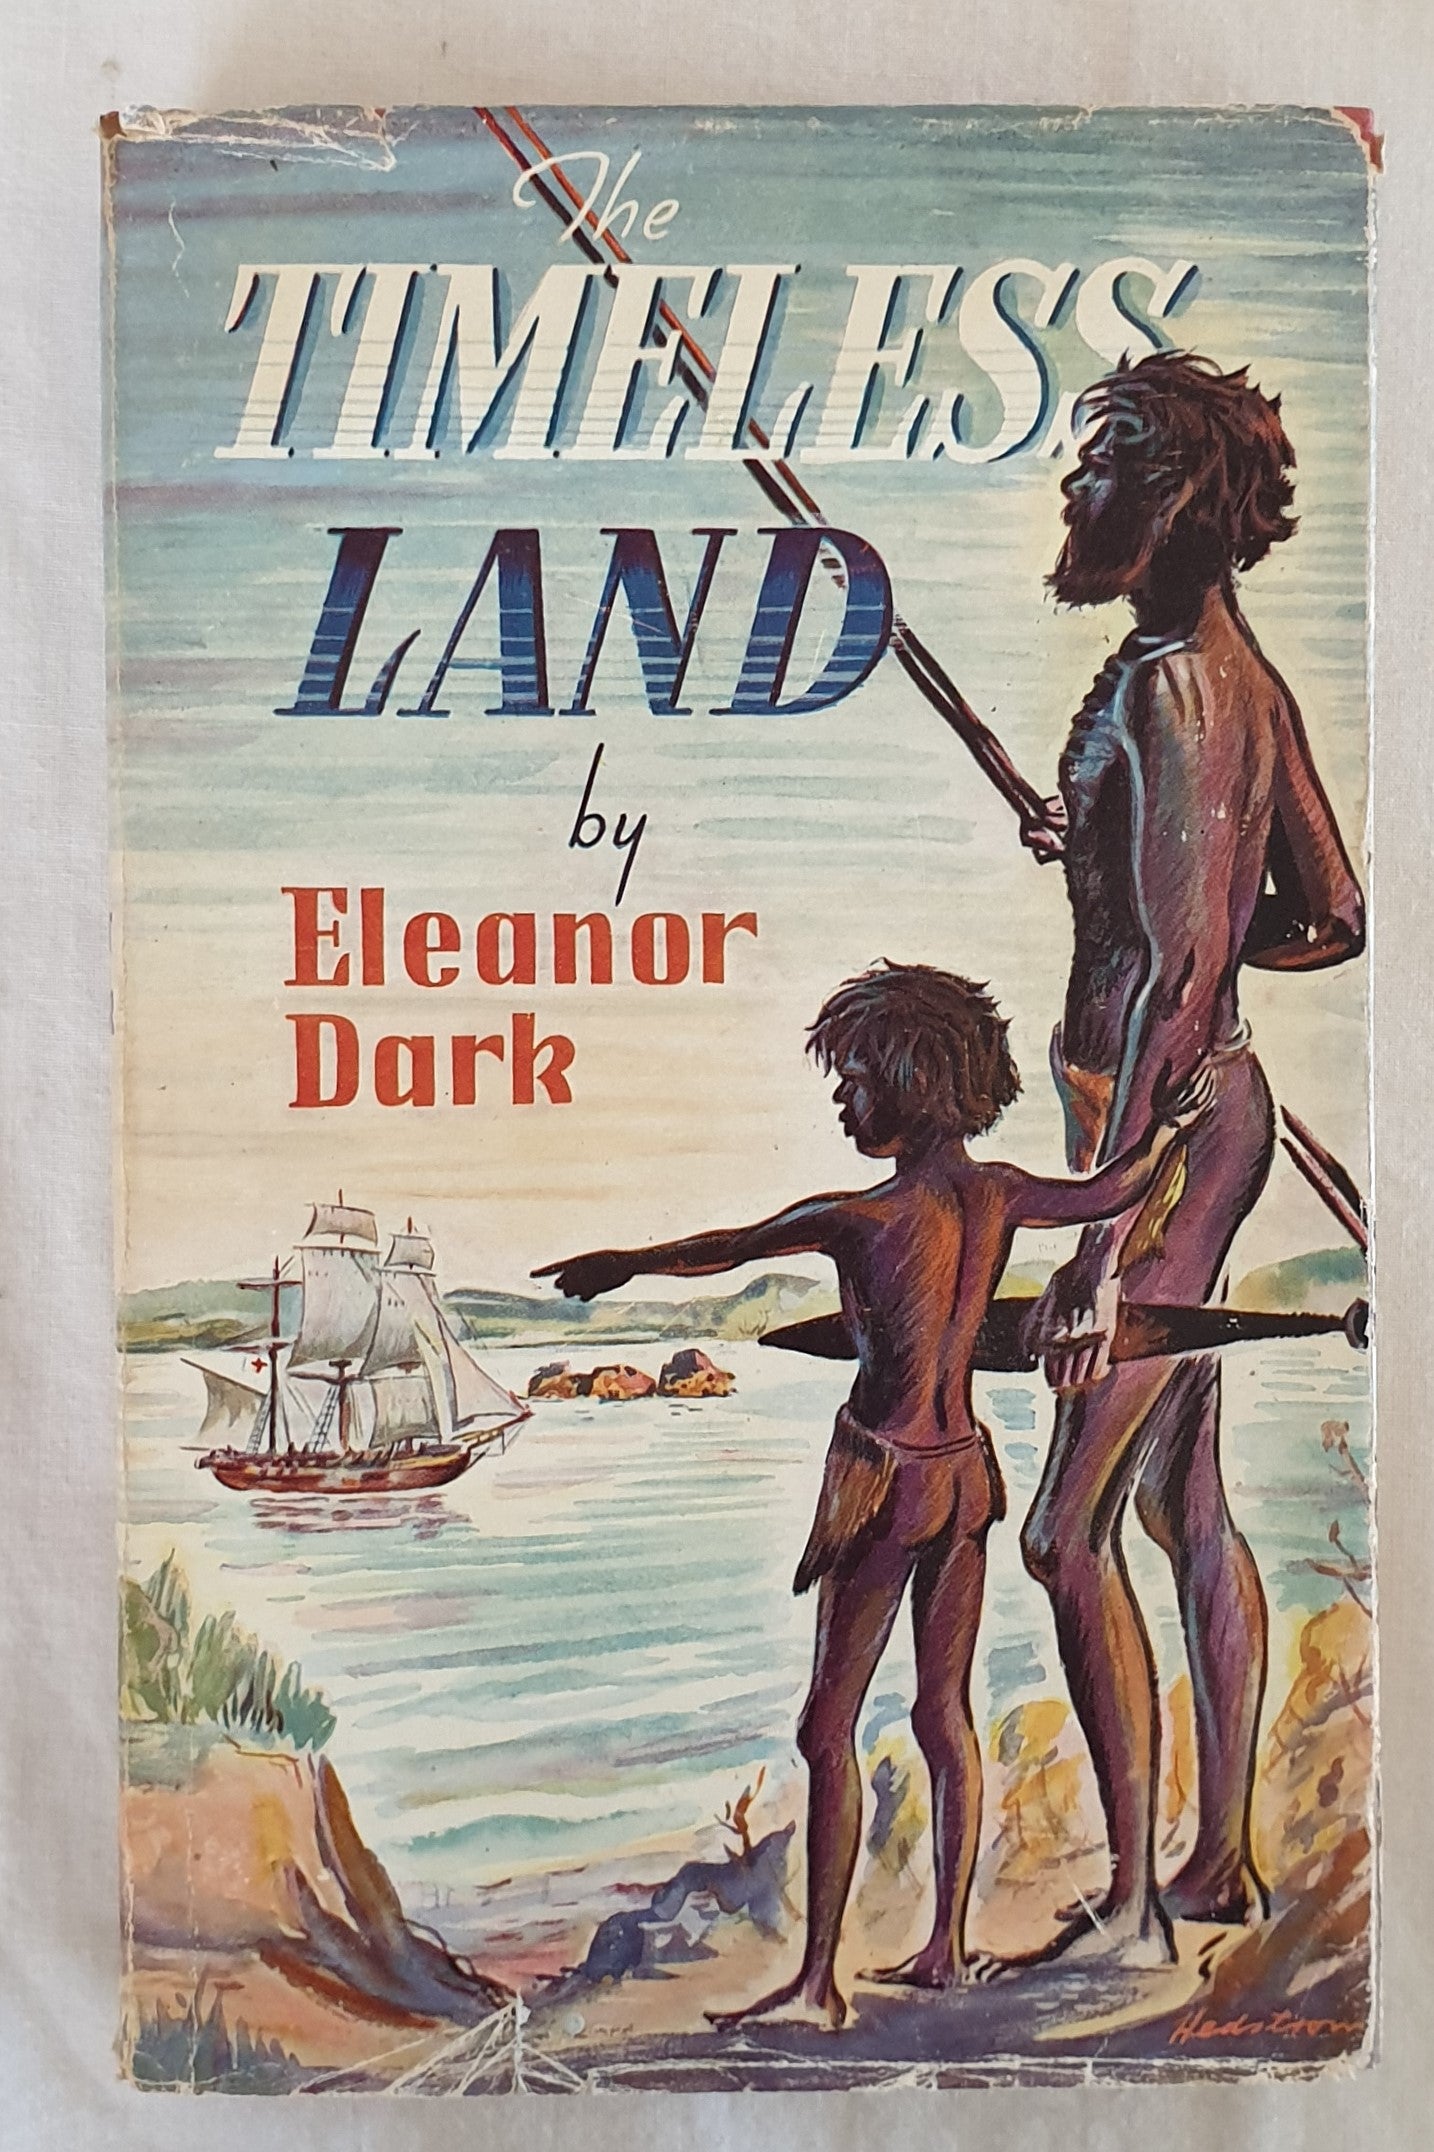 The Timeless Land by Eleanor Dark